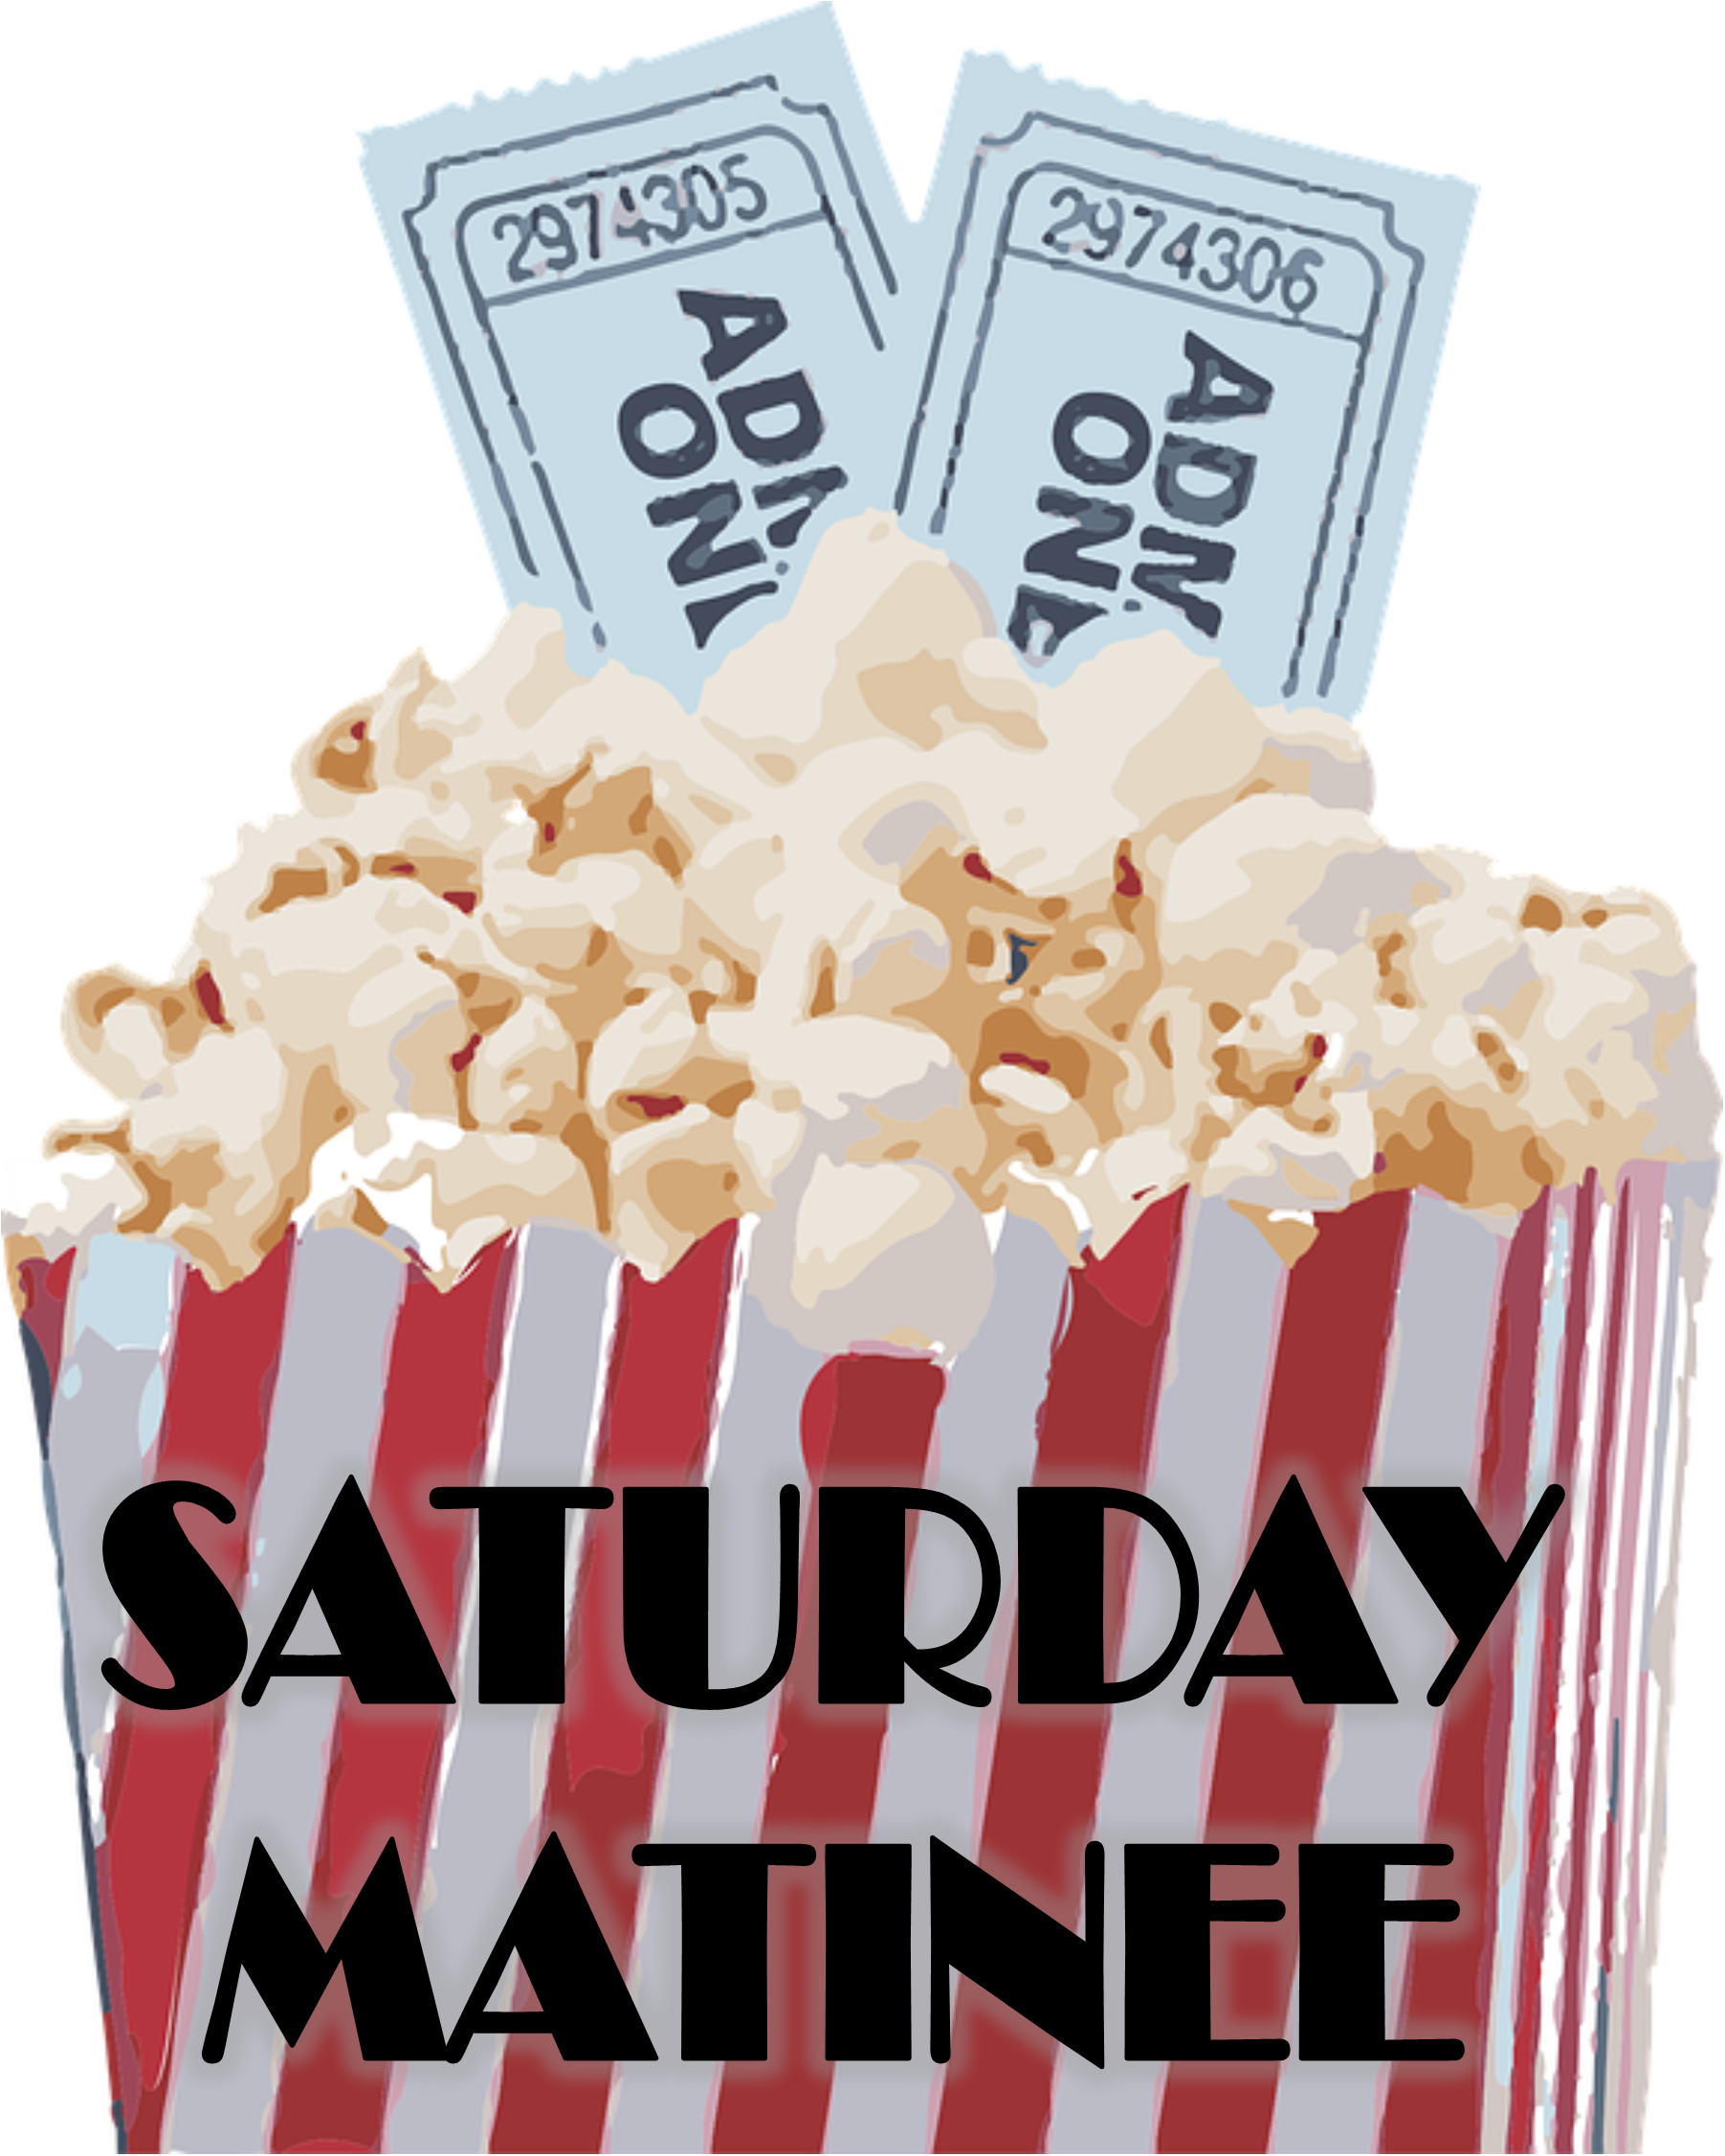 Top of a popcorn box with two tickets sticking up out of the popcorn and the words Saturday Matinee on the box.